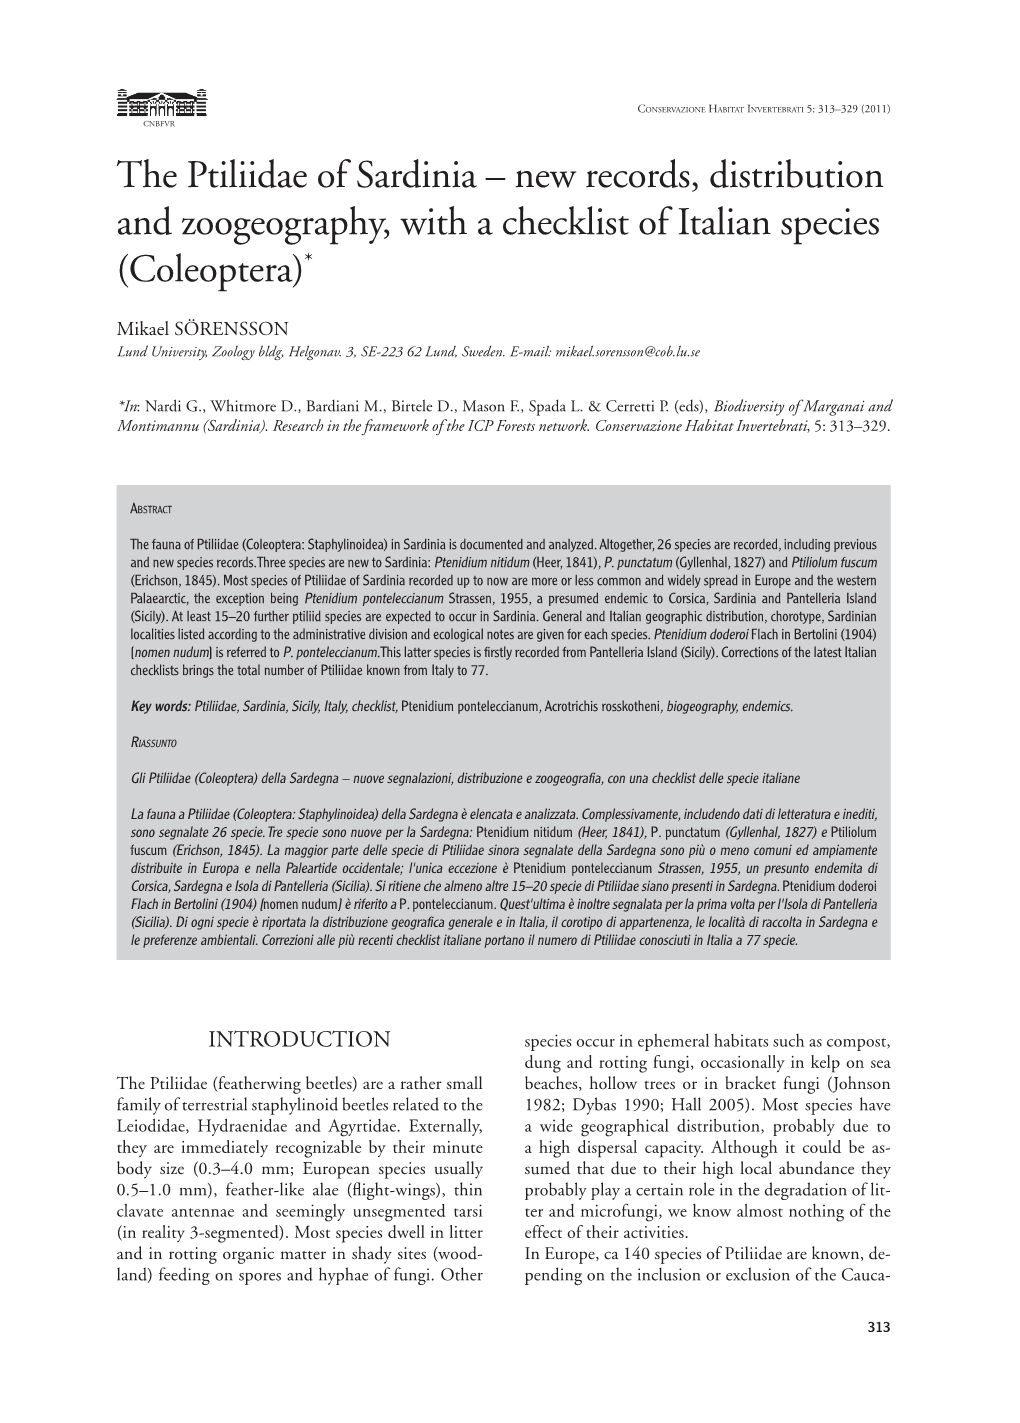 The Ptiliidae of Sardinia – New Records, Distribution and Zoogeography, with a Checklist of Italian Species ( Coleoptera)*